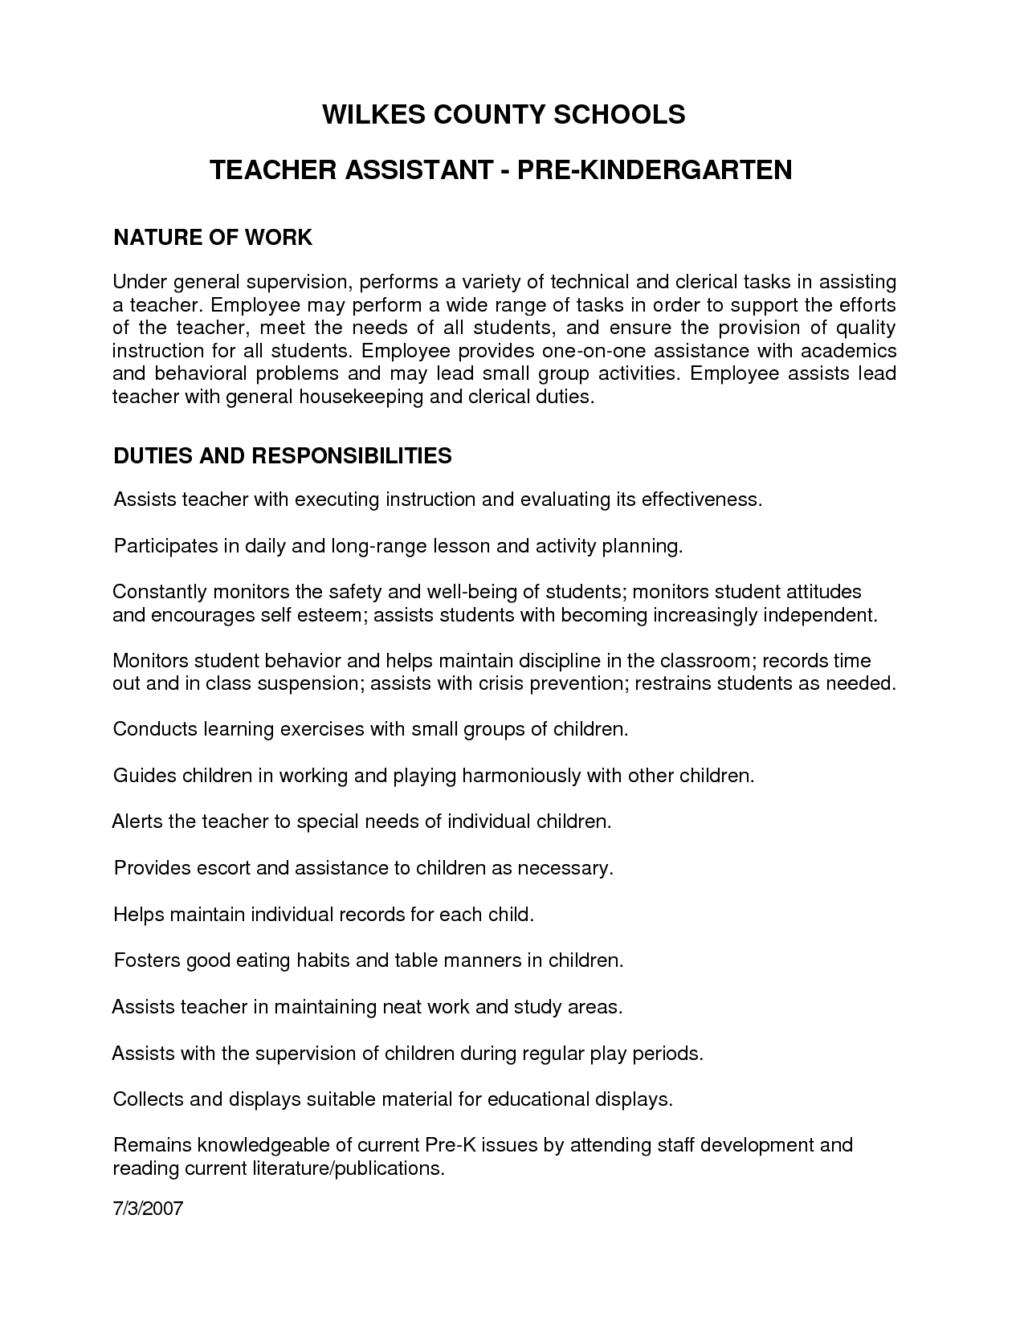 Letter Recommendation For Preschool Teacher Assistant Cover in dimensions 1024 X 1325